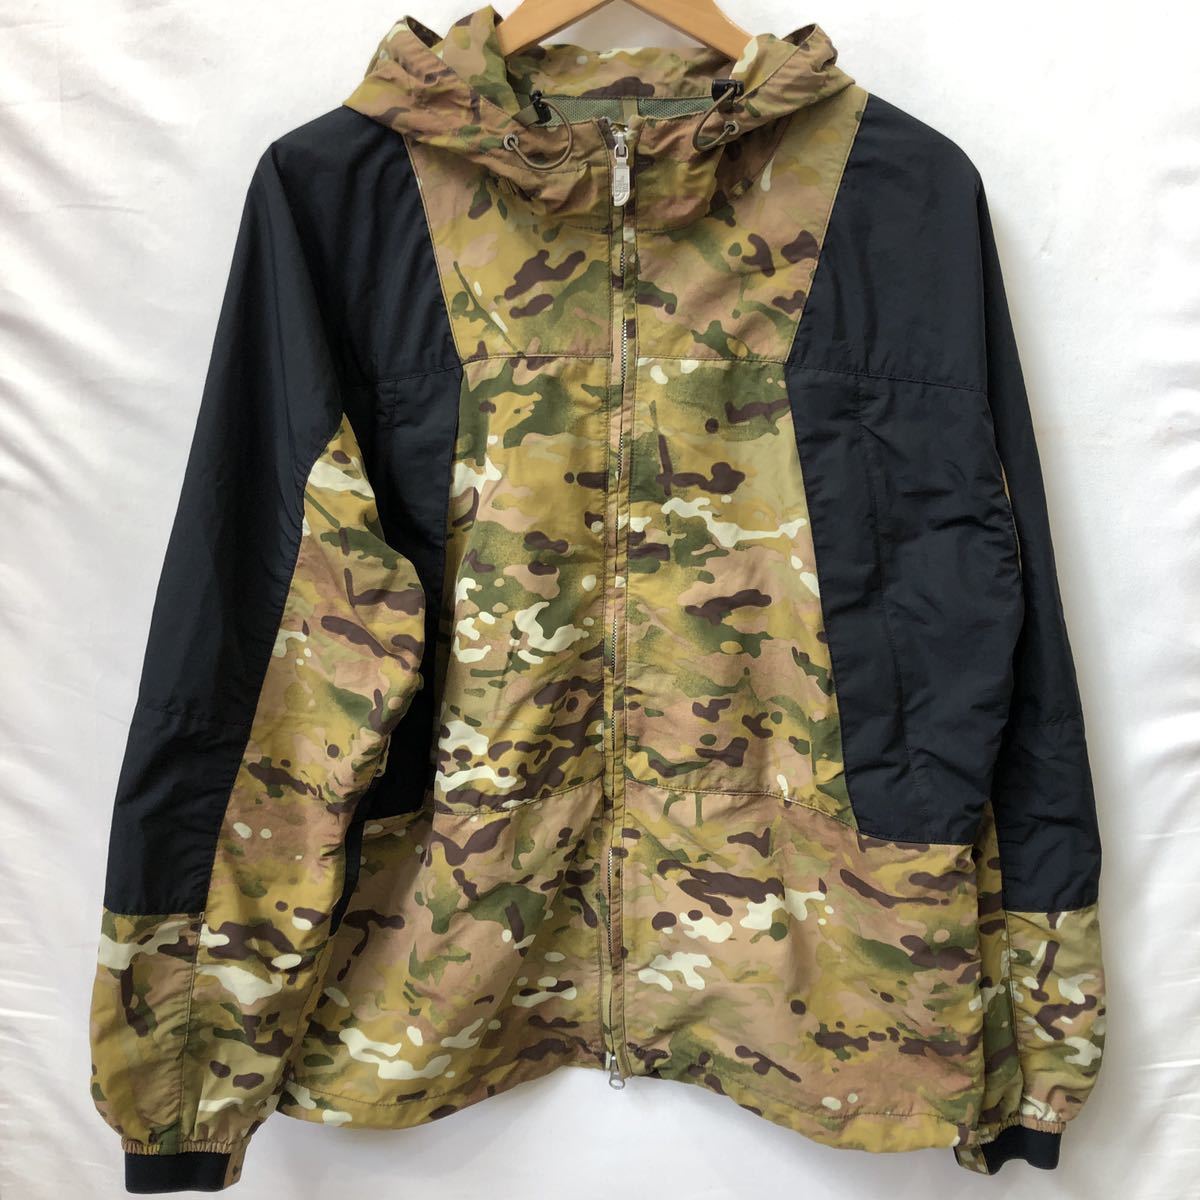 【THE NORTH FACE】マウンテンパーカー ザノースフェイス L カモフラ BEAUTY&YOUTH UNITED ARROWS MOUNTAIN WIND PARKA np2824n ts202303